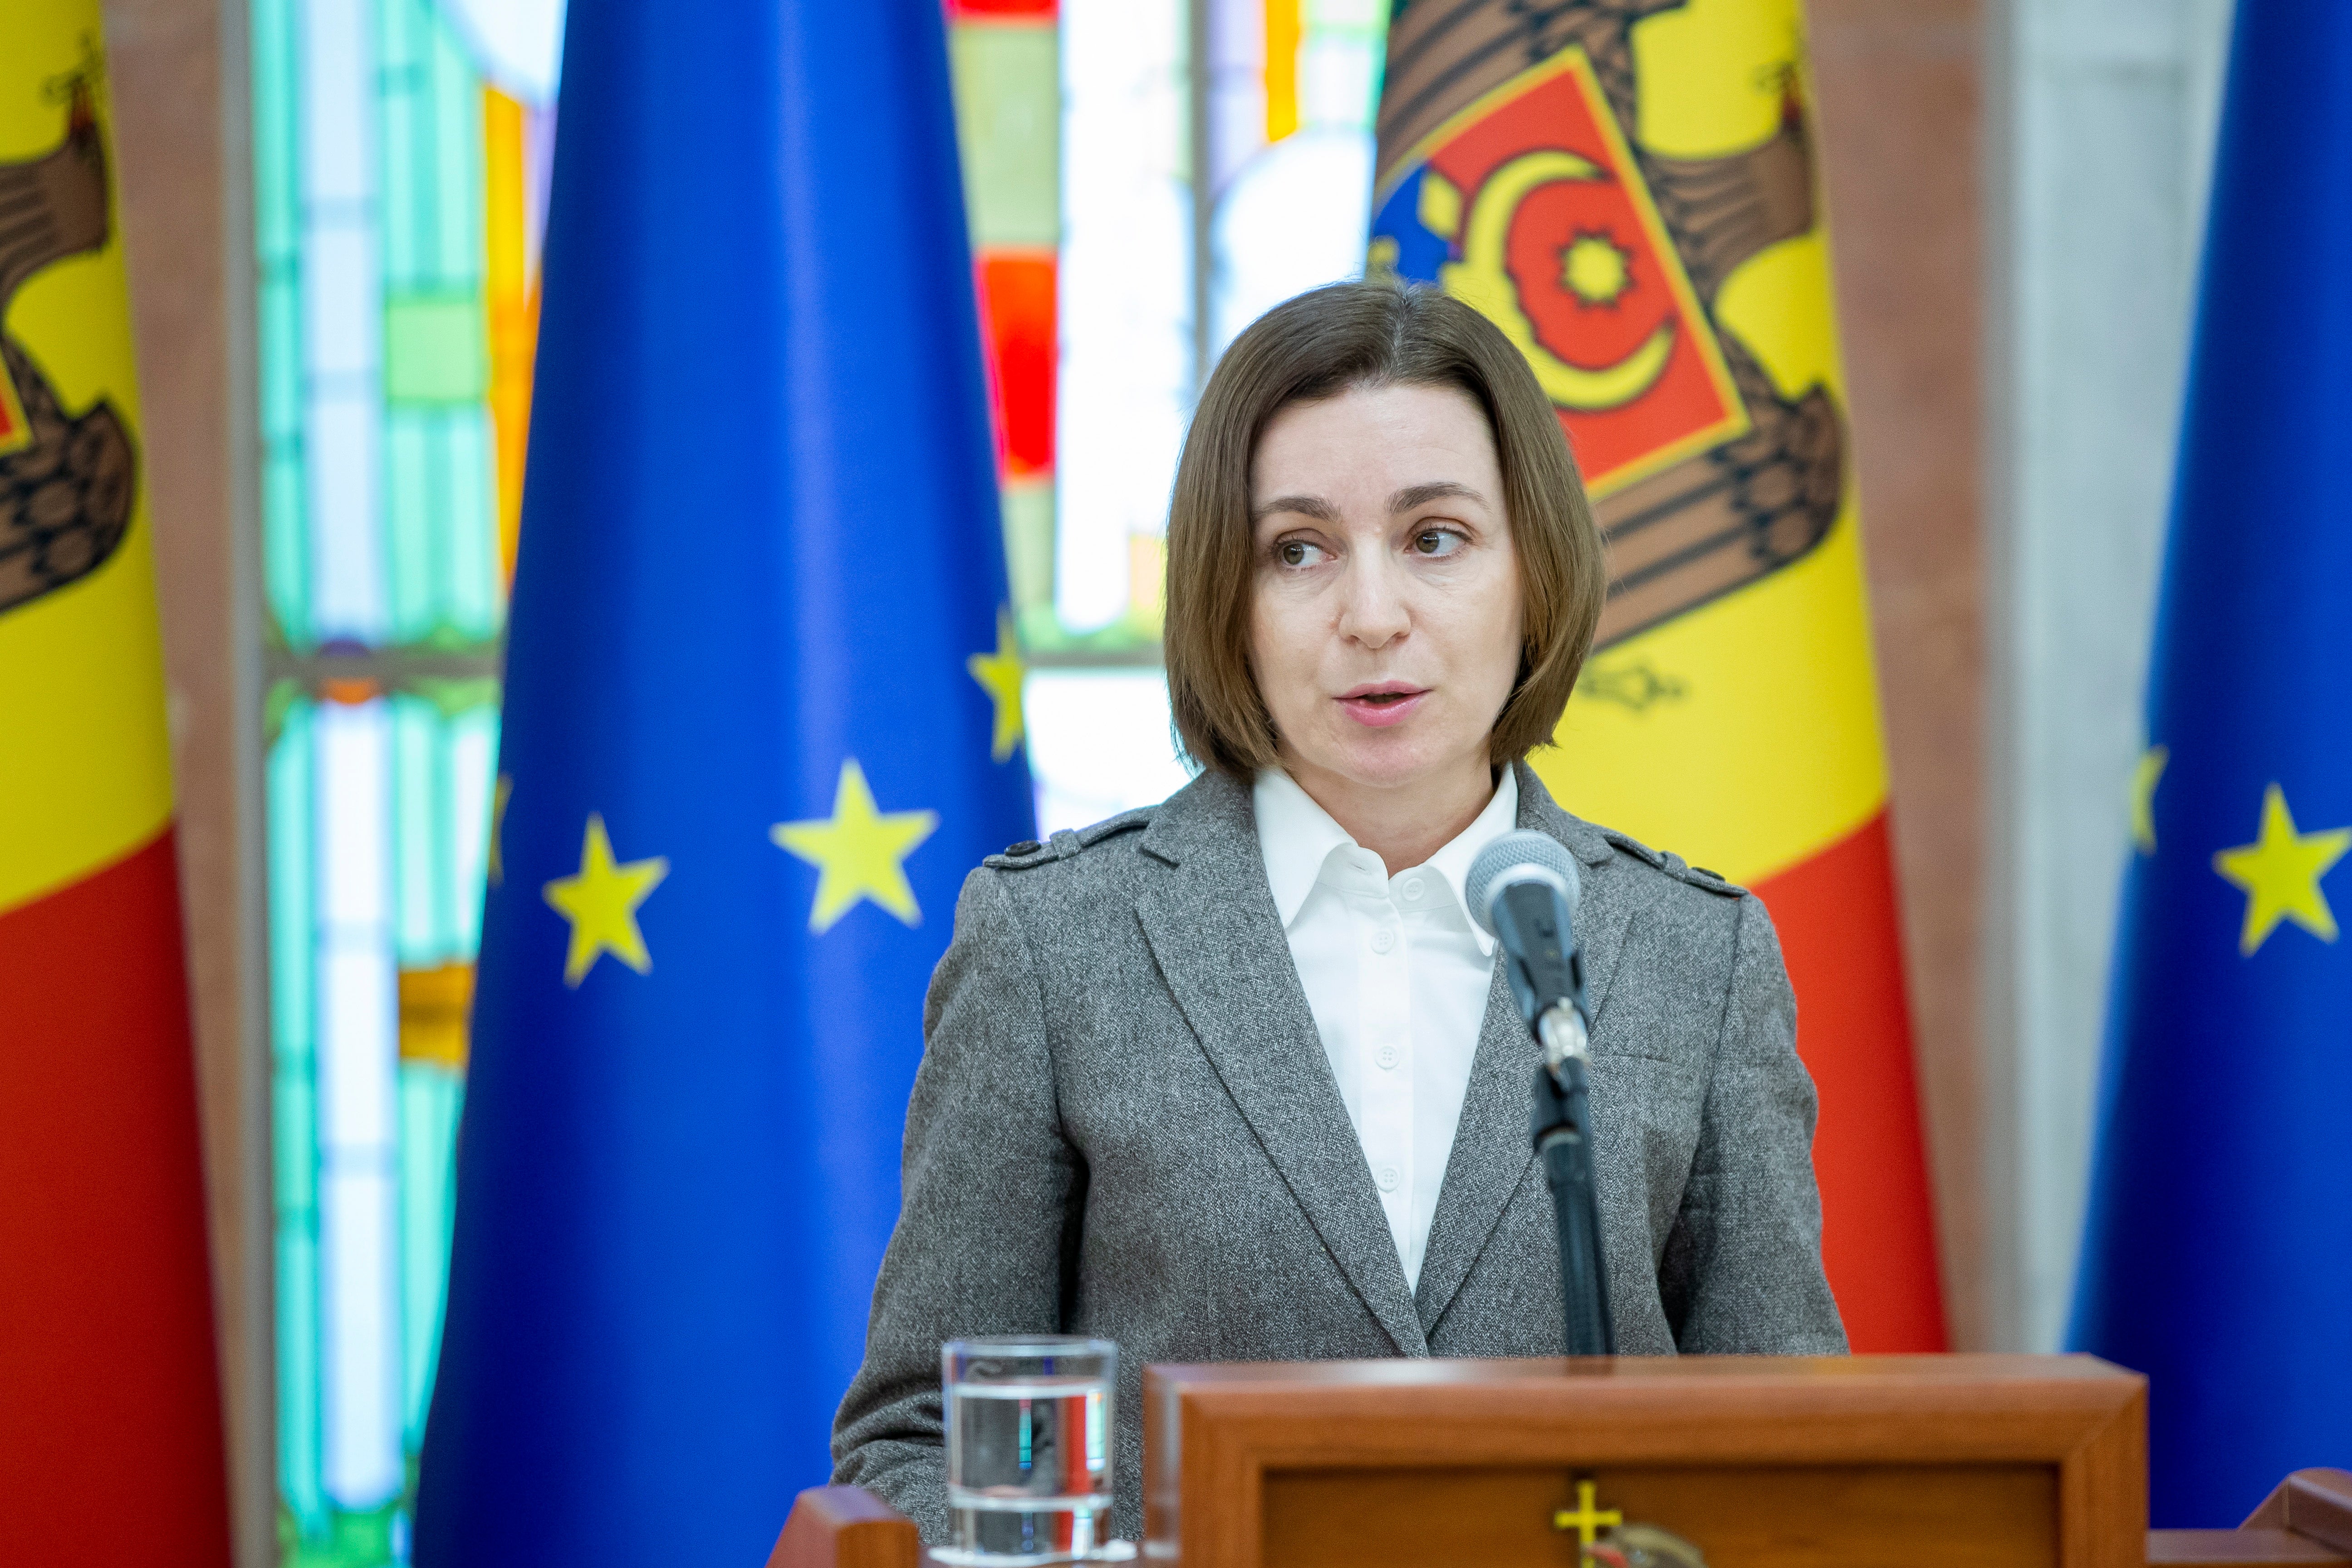 President of Moldova Maia Sandu has expressed concerns following bombings in the breakaway region of Transnistria